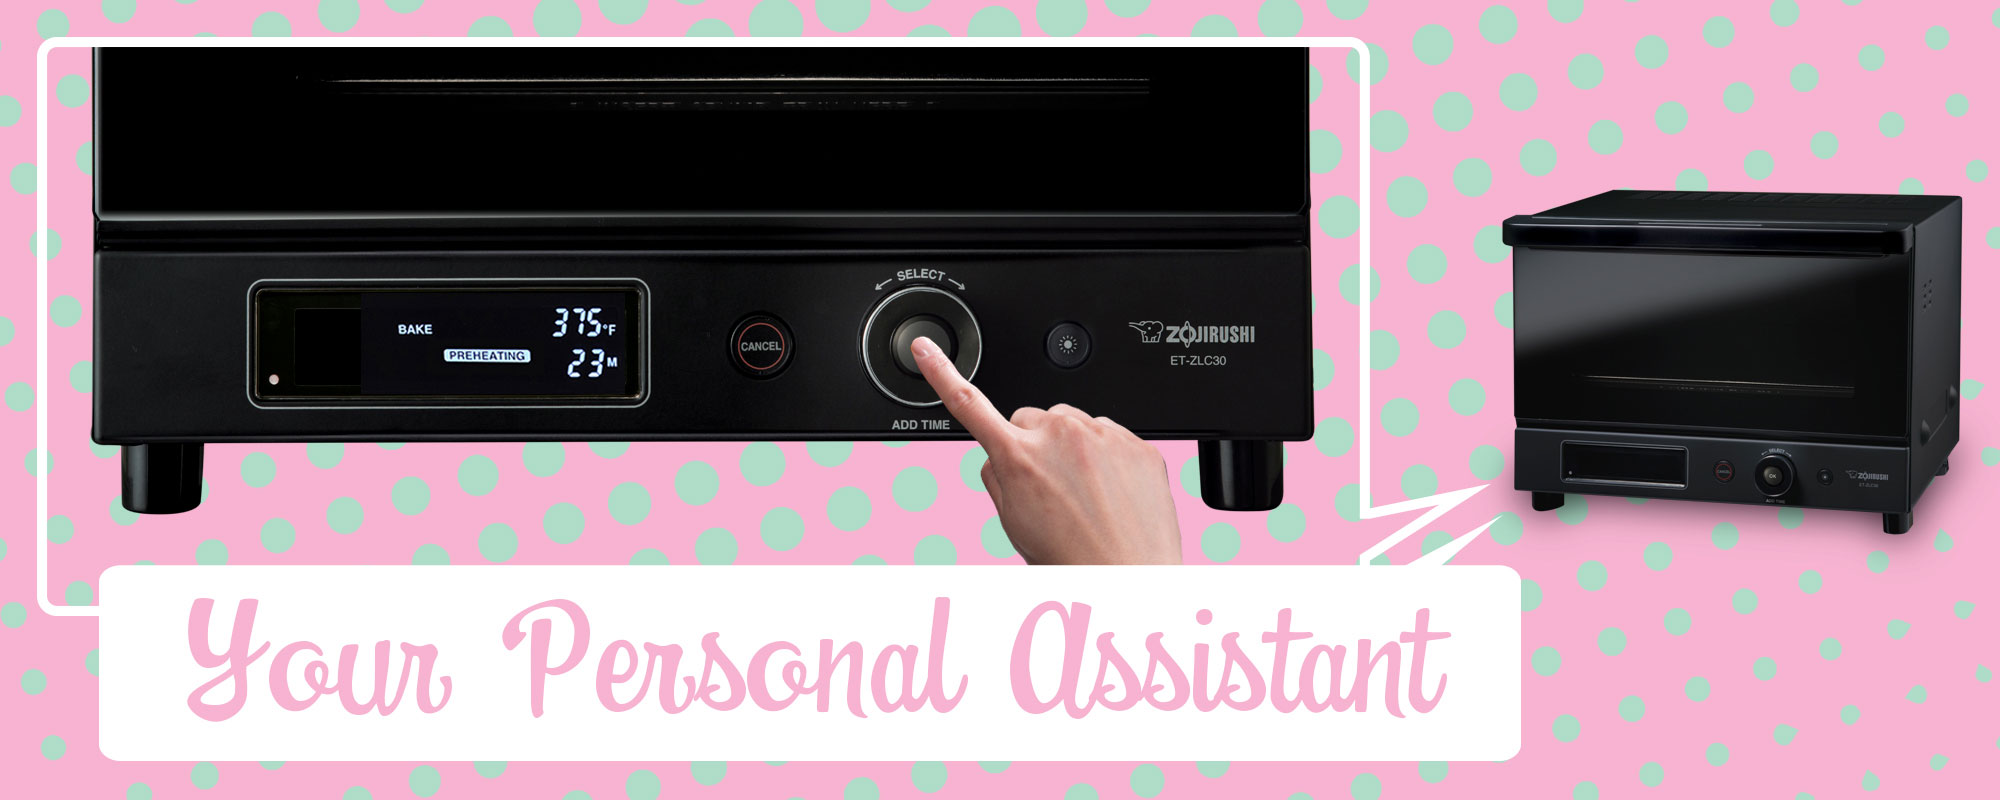 Your personal assistant